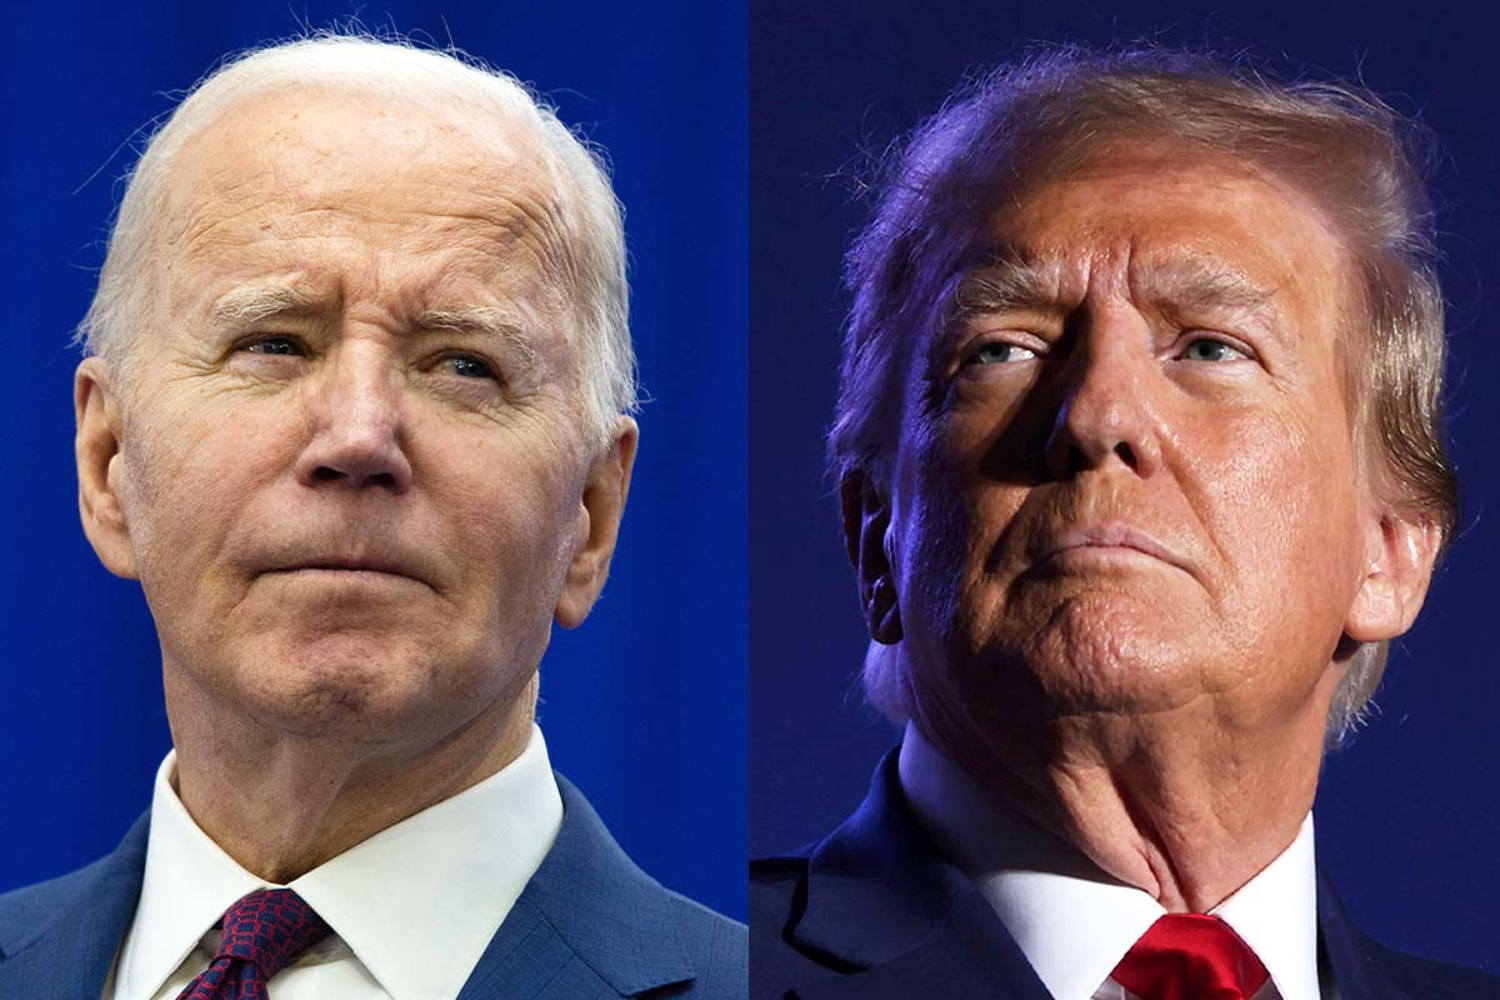 Chuck Todd: Is Biden or Trump the bigger drag on his party?